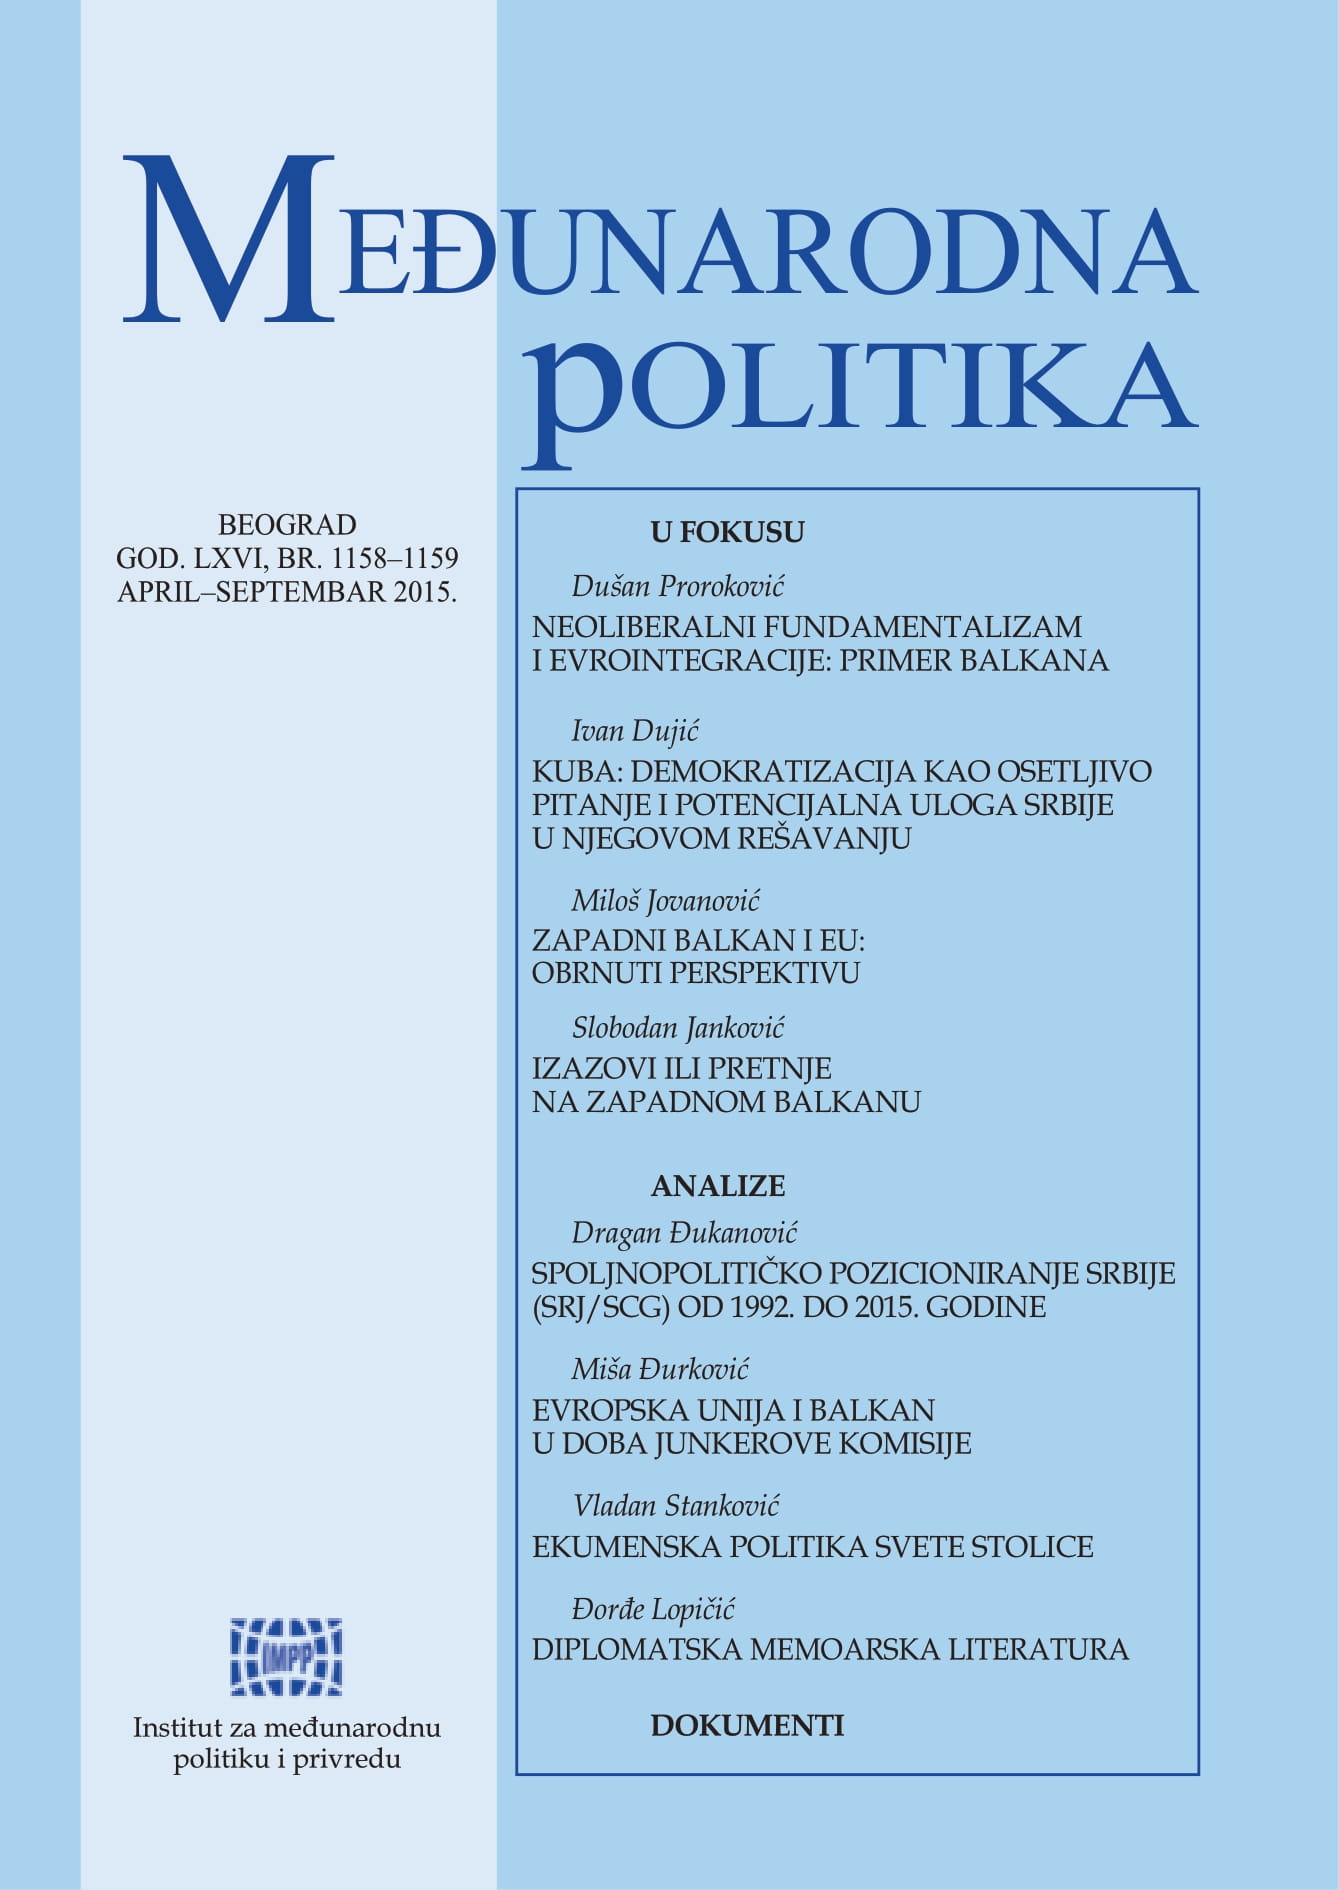 The Neo-Liberal Fundamentalism and European Integrations: The Balkan Case Cover Image